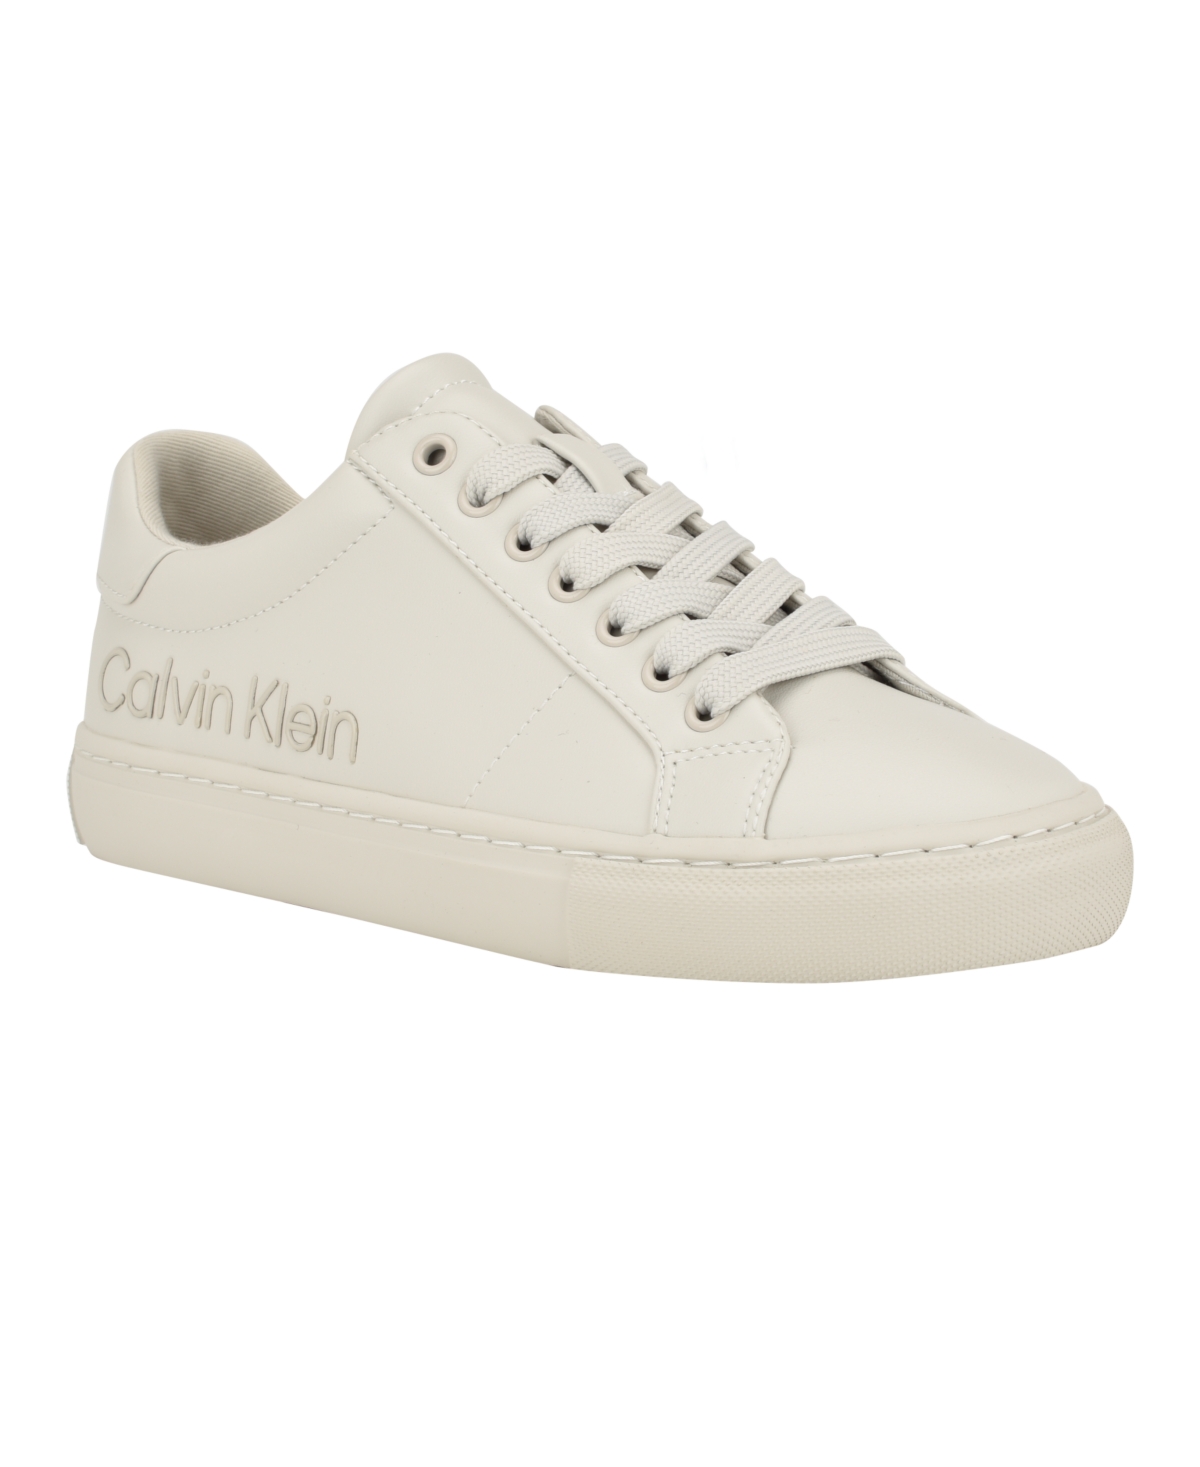 Calvin Klein Women's Camzy Round Toe Lace-up Casual Sneakers In Light Gray